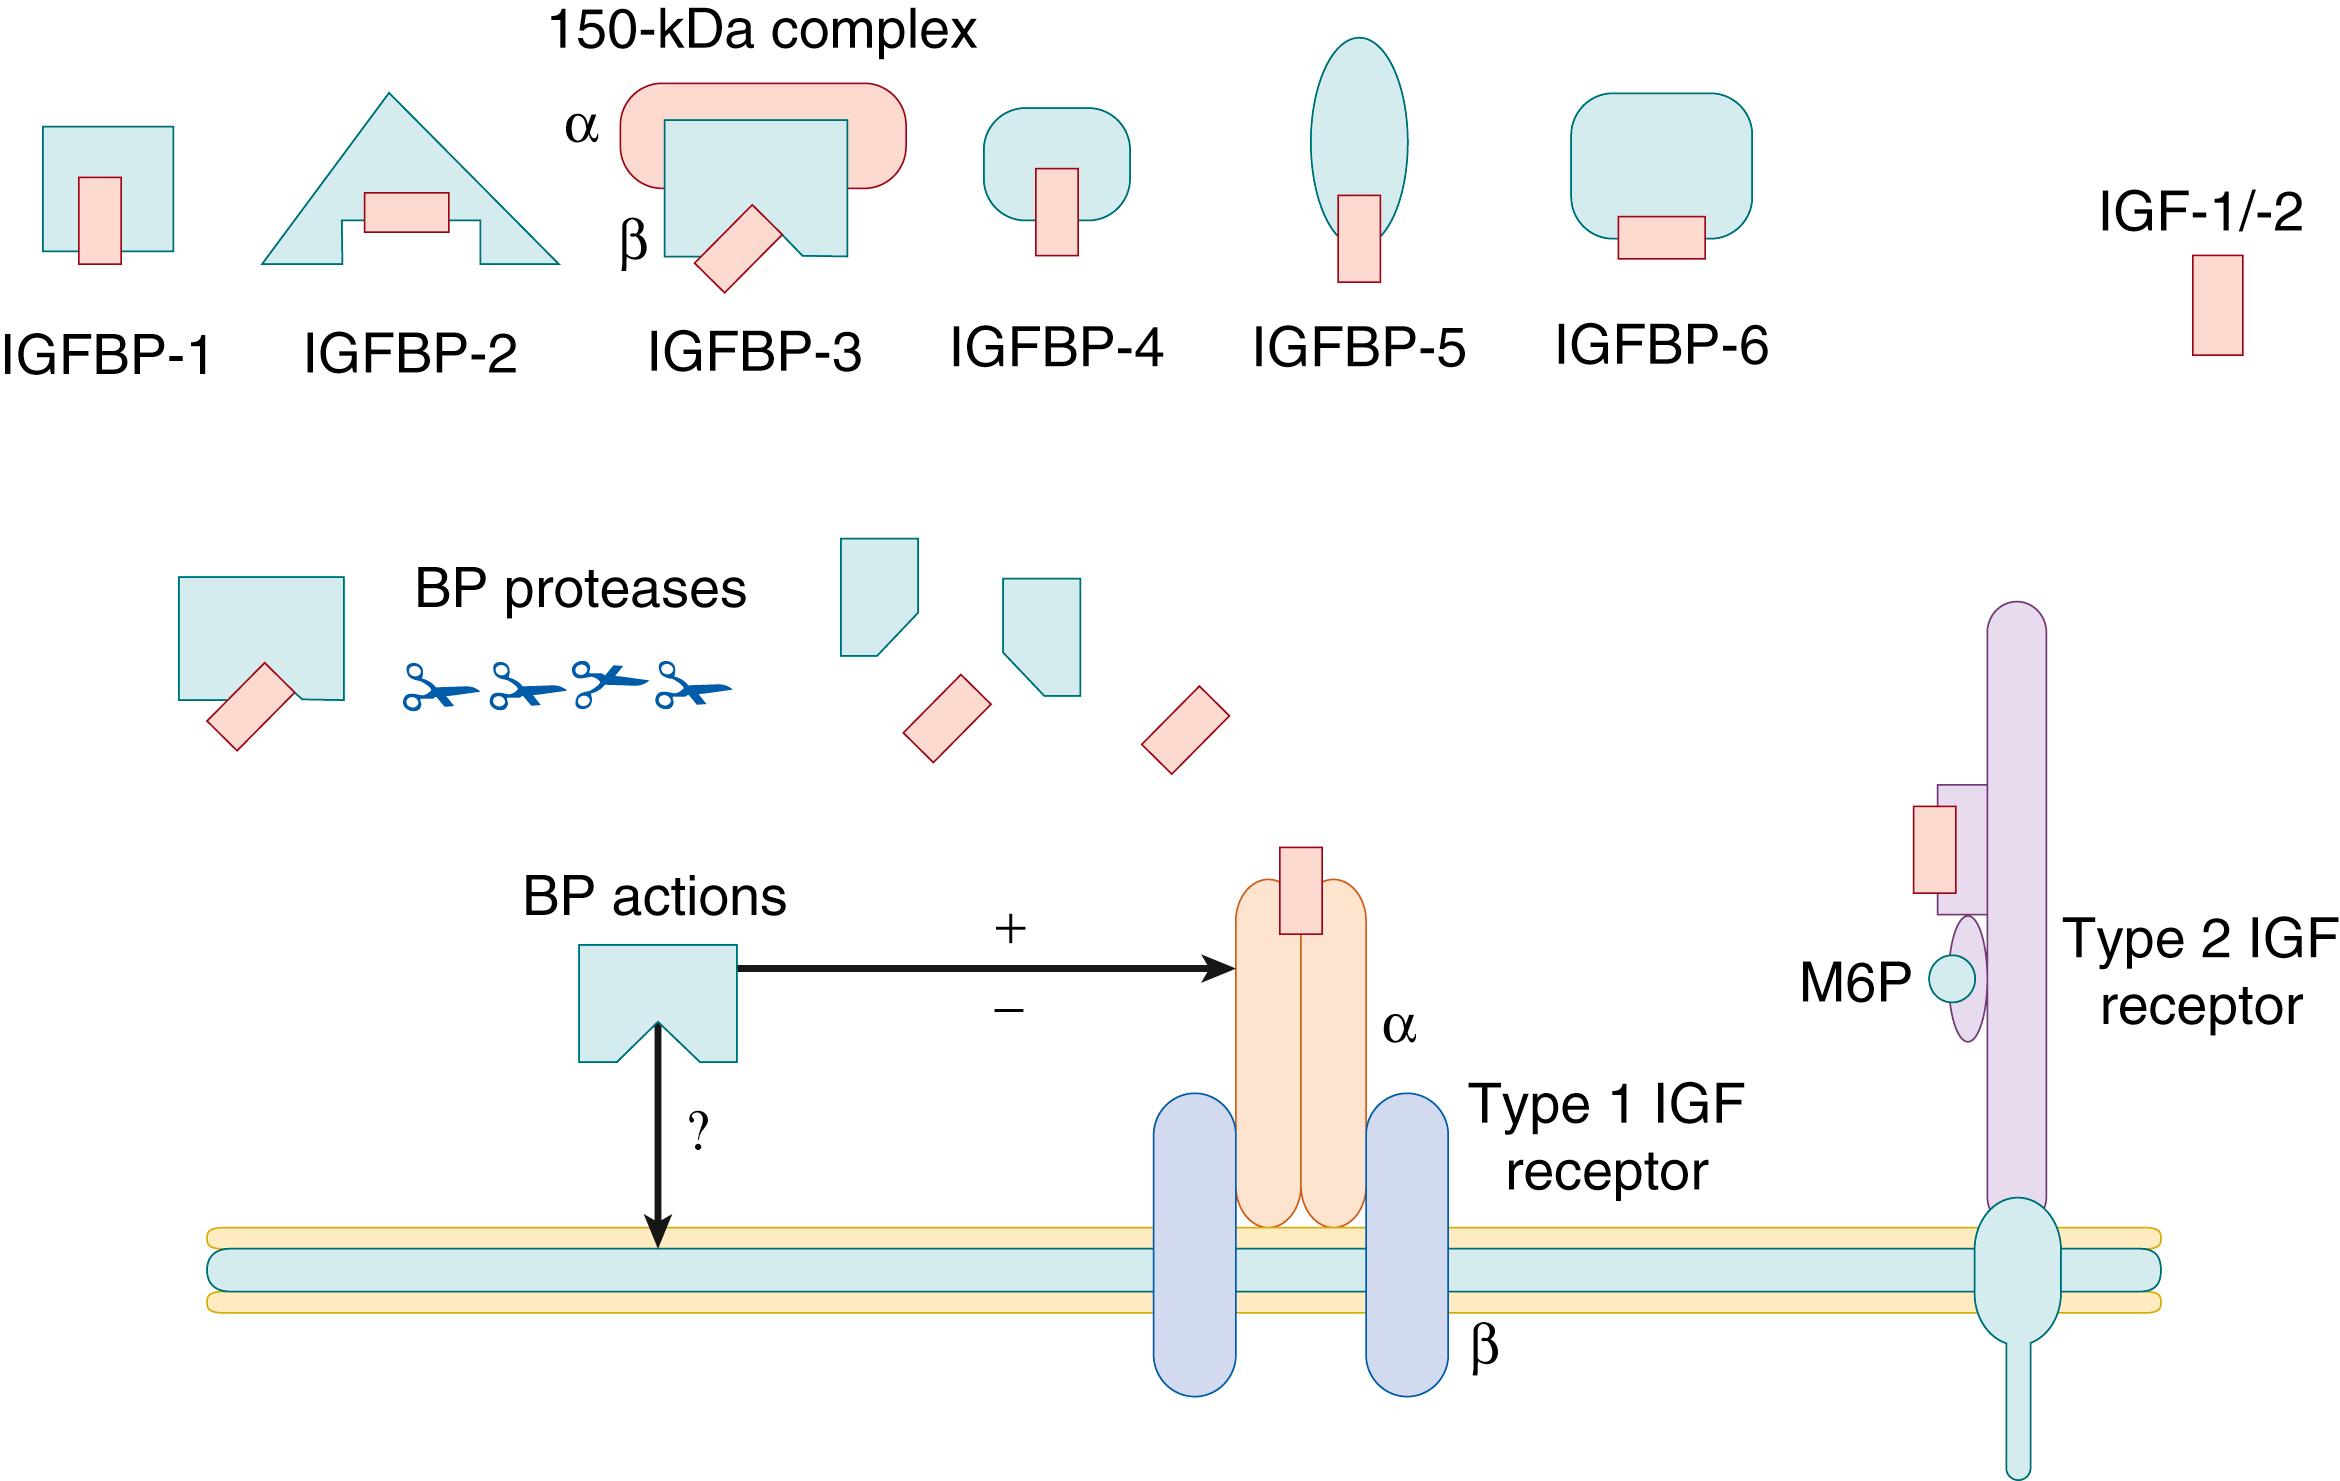 Fig. 140.1, The insulin-like growth factor (IGF) axis, including the IGFs, IGF-binding proteins (IGFBP) , and IGFBP proteases. The relationship of the components of the IGF axis is depicted. BP, Binding protein; M6P, mannose-6-phosphate.